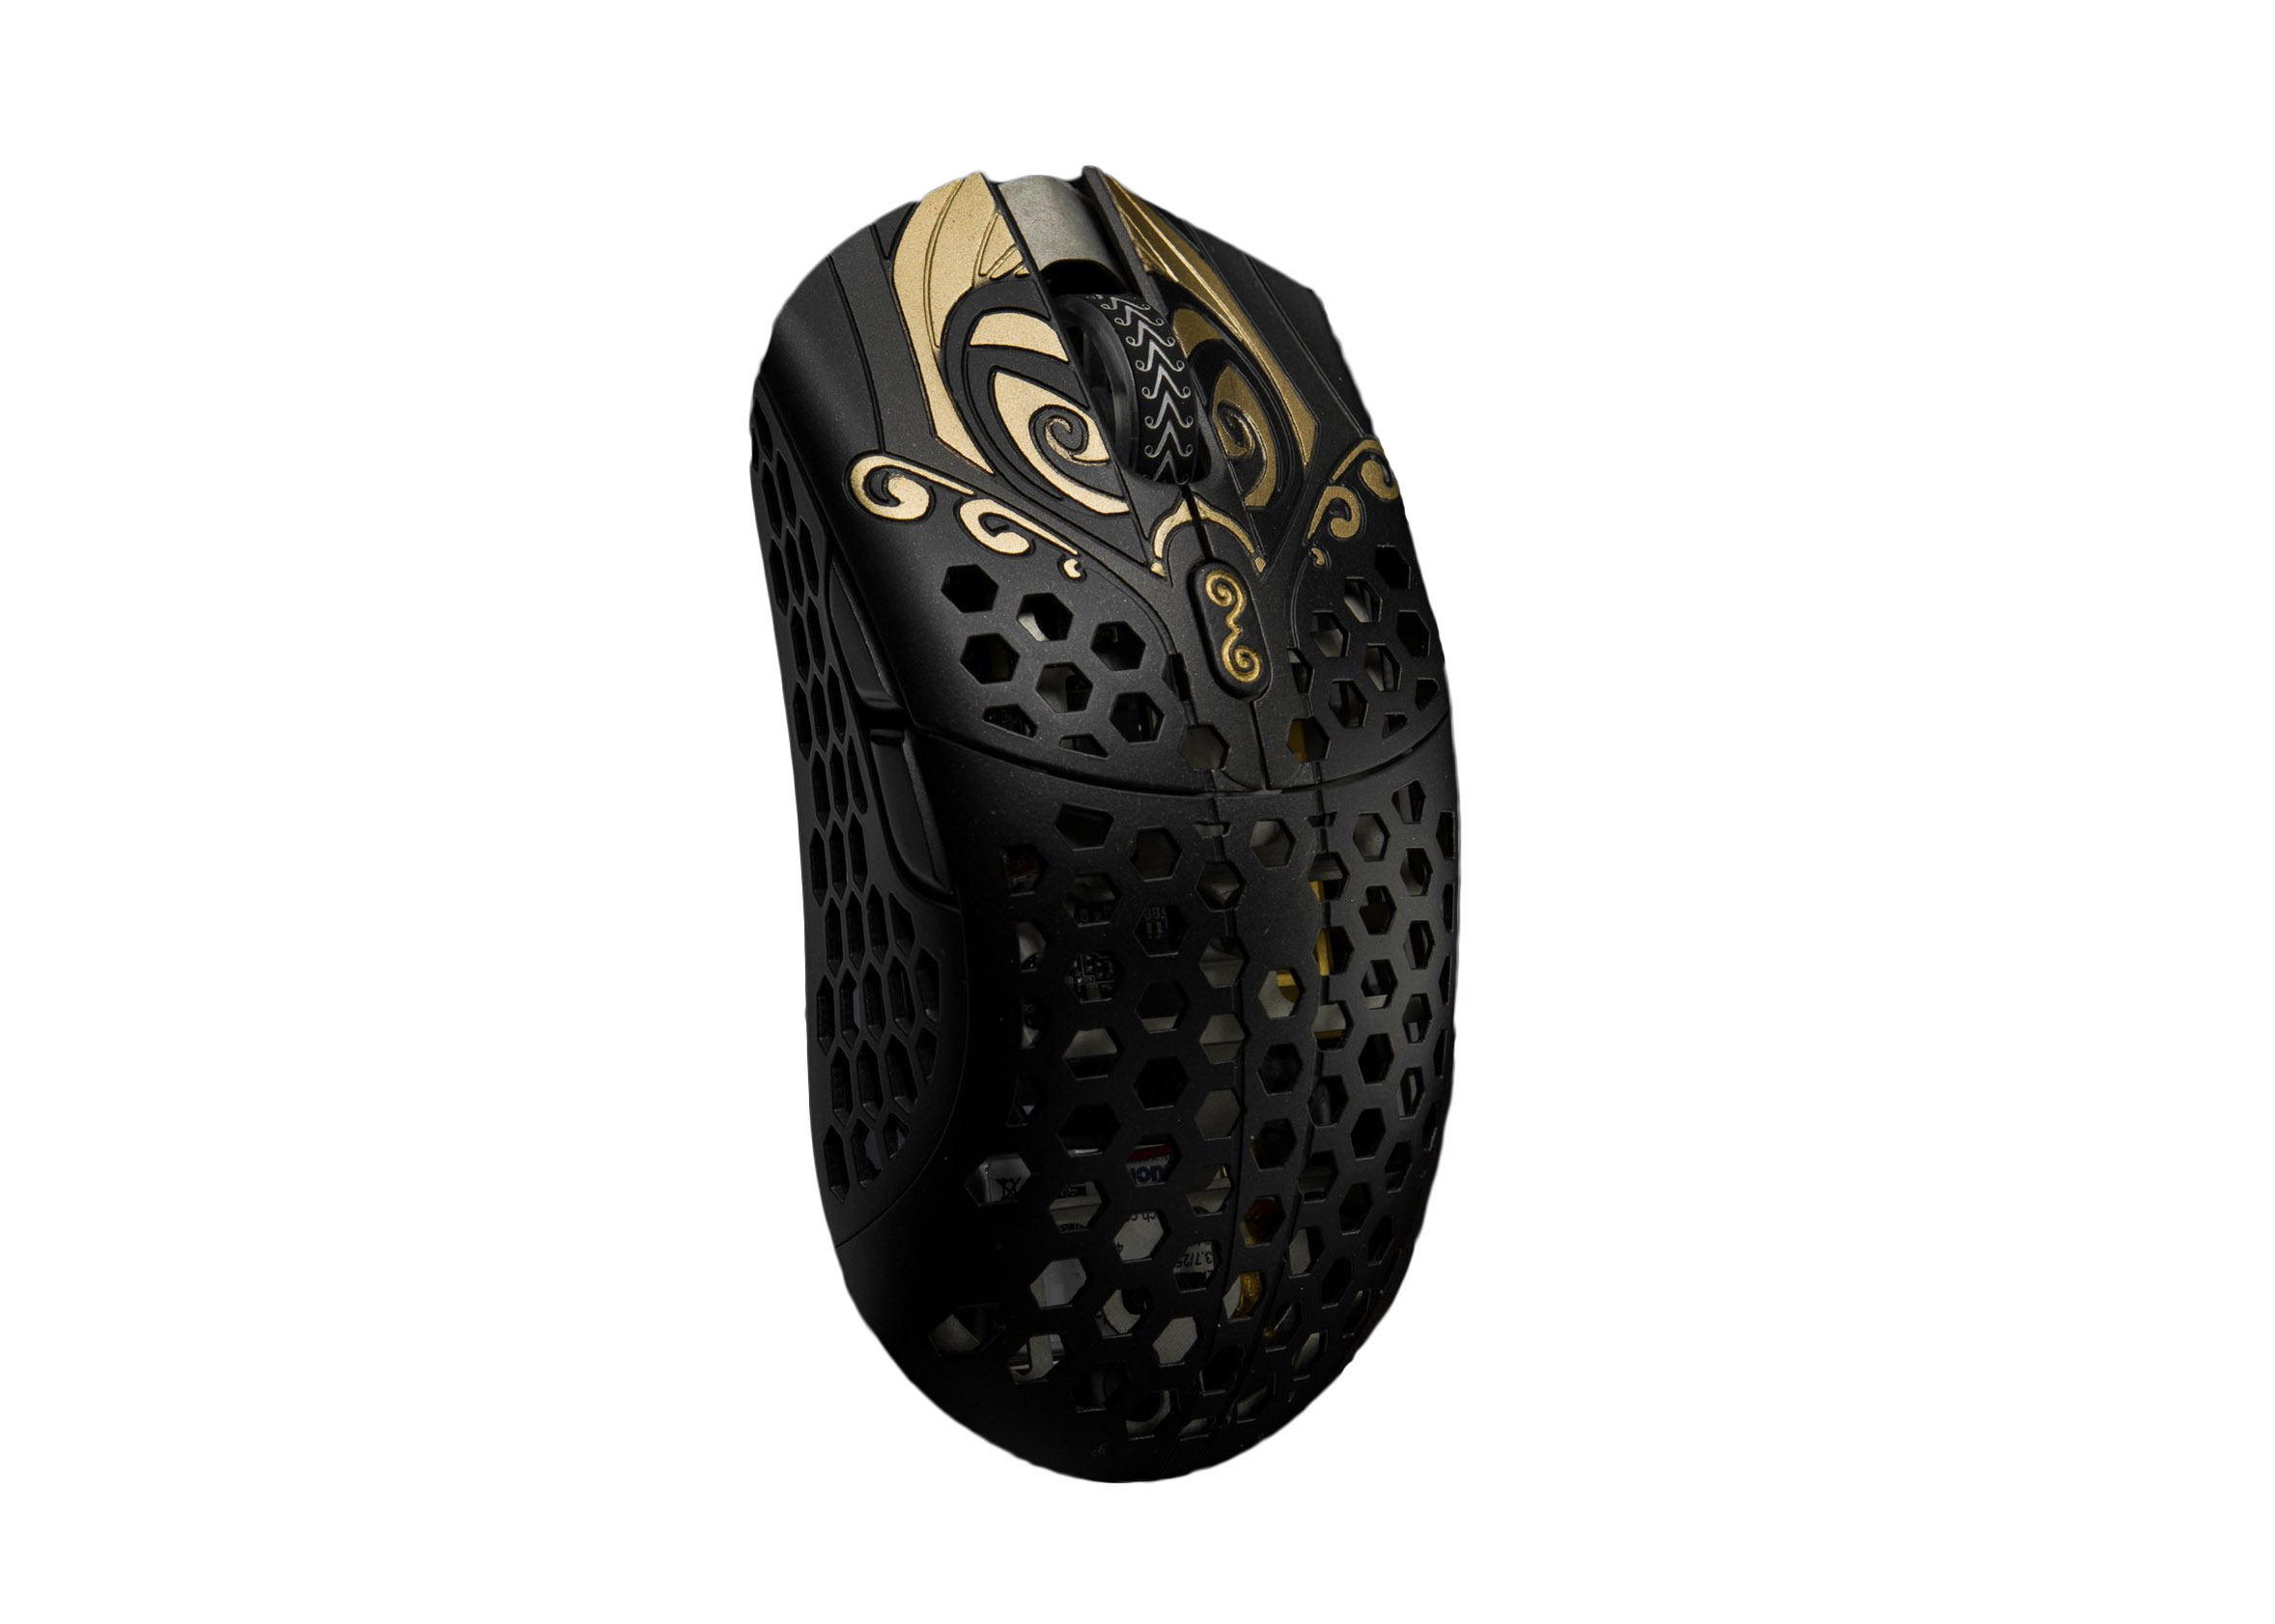 Finalmouse Starlight-12 Wireless Mouse Small Hades King of the 